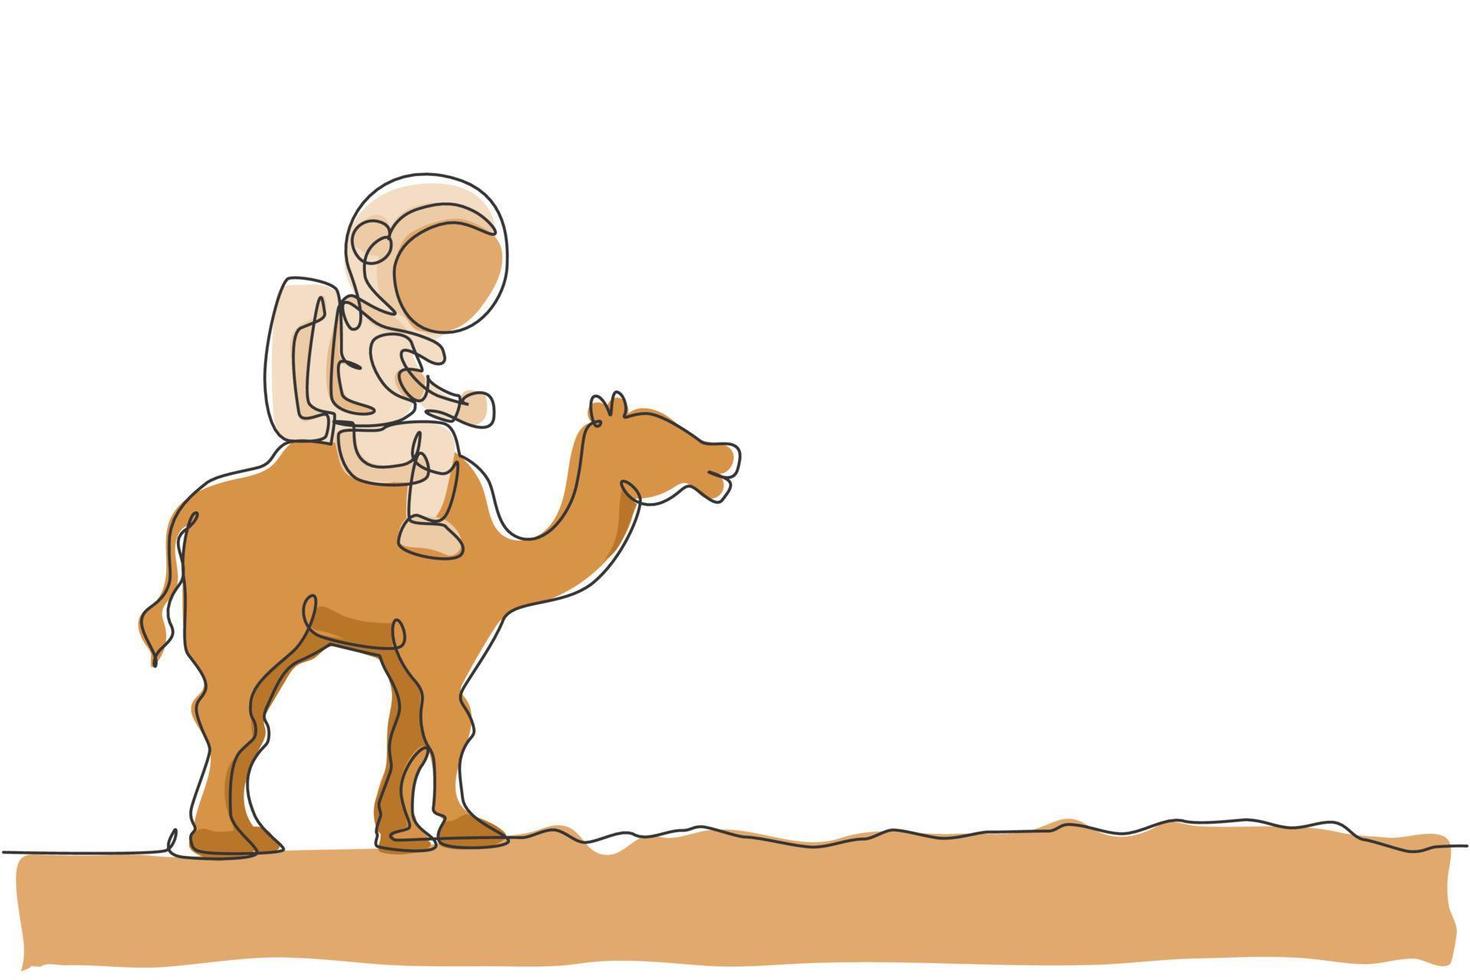 Single continuous line drawing of cosmonaut with spacesuit riding desert camel, farm animal in moon surface. Fantasy astronaut safari journey concept. Trendy one line draw design vector illustration